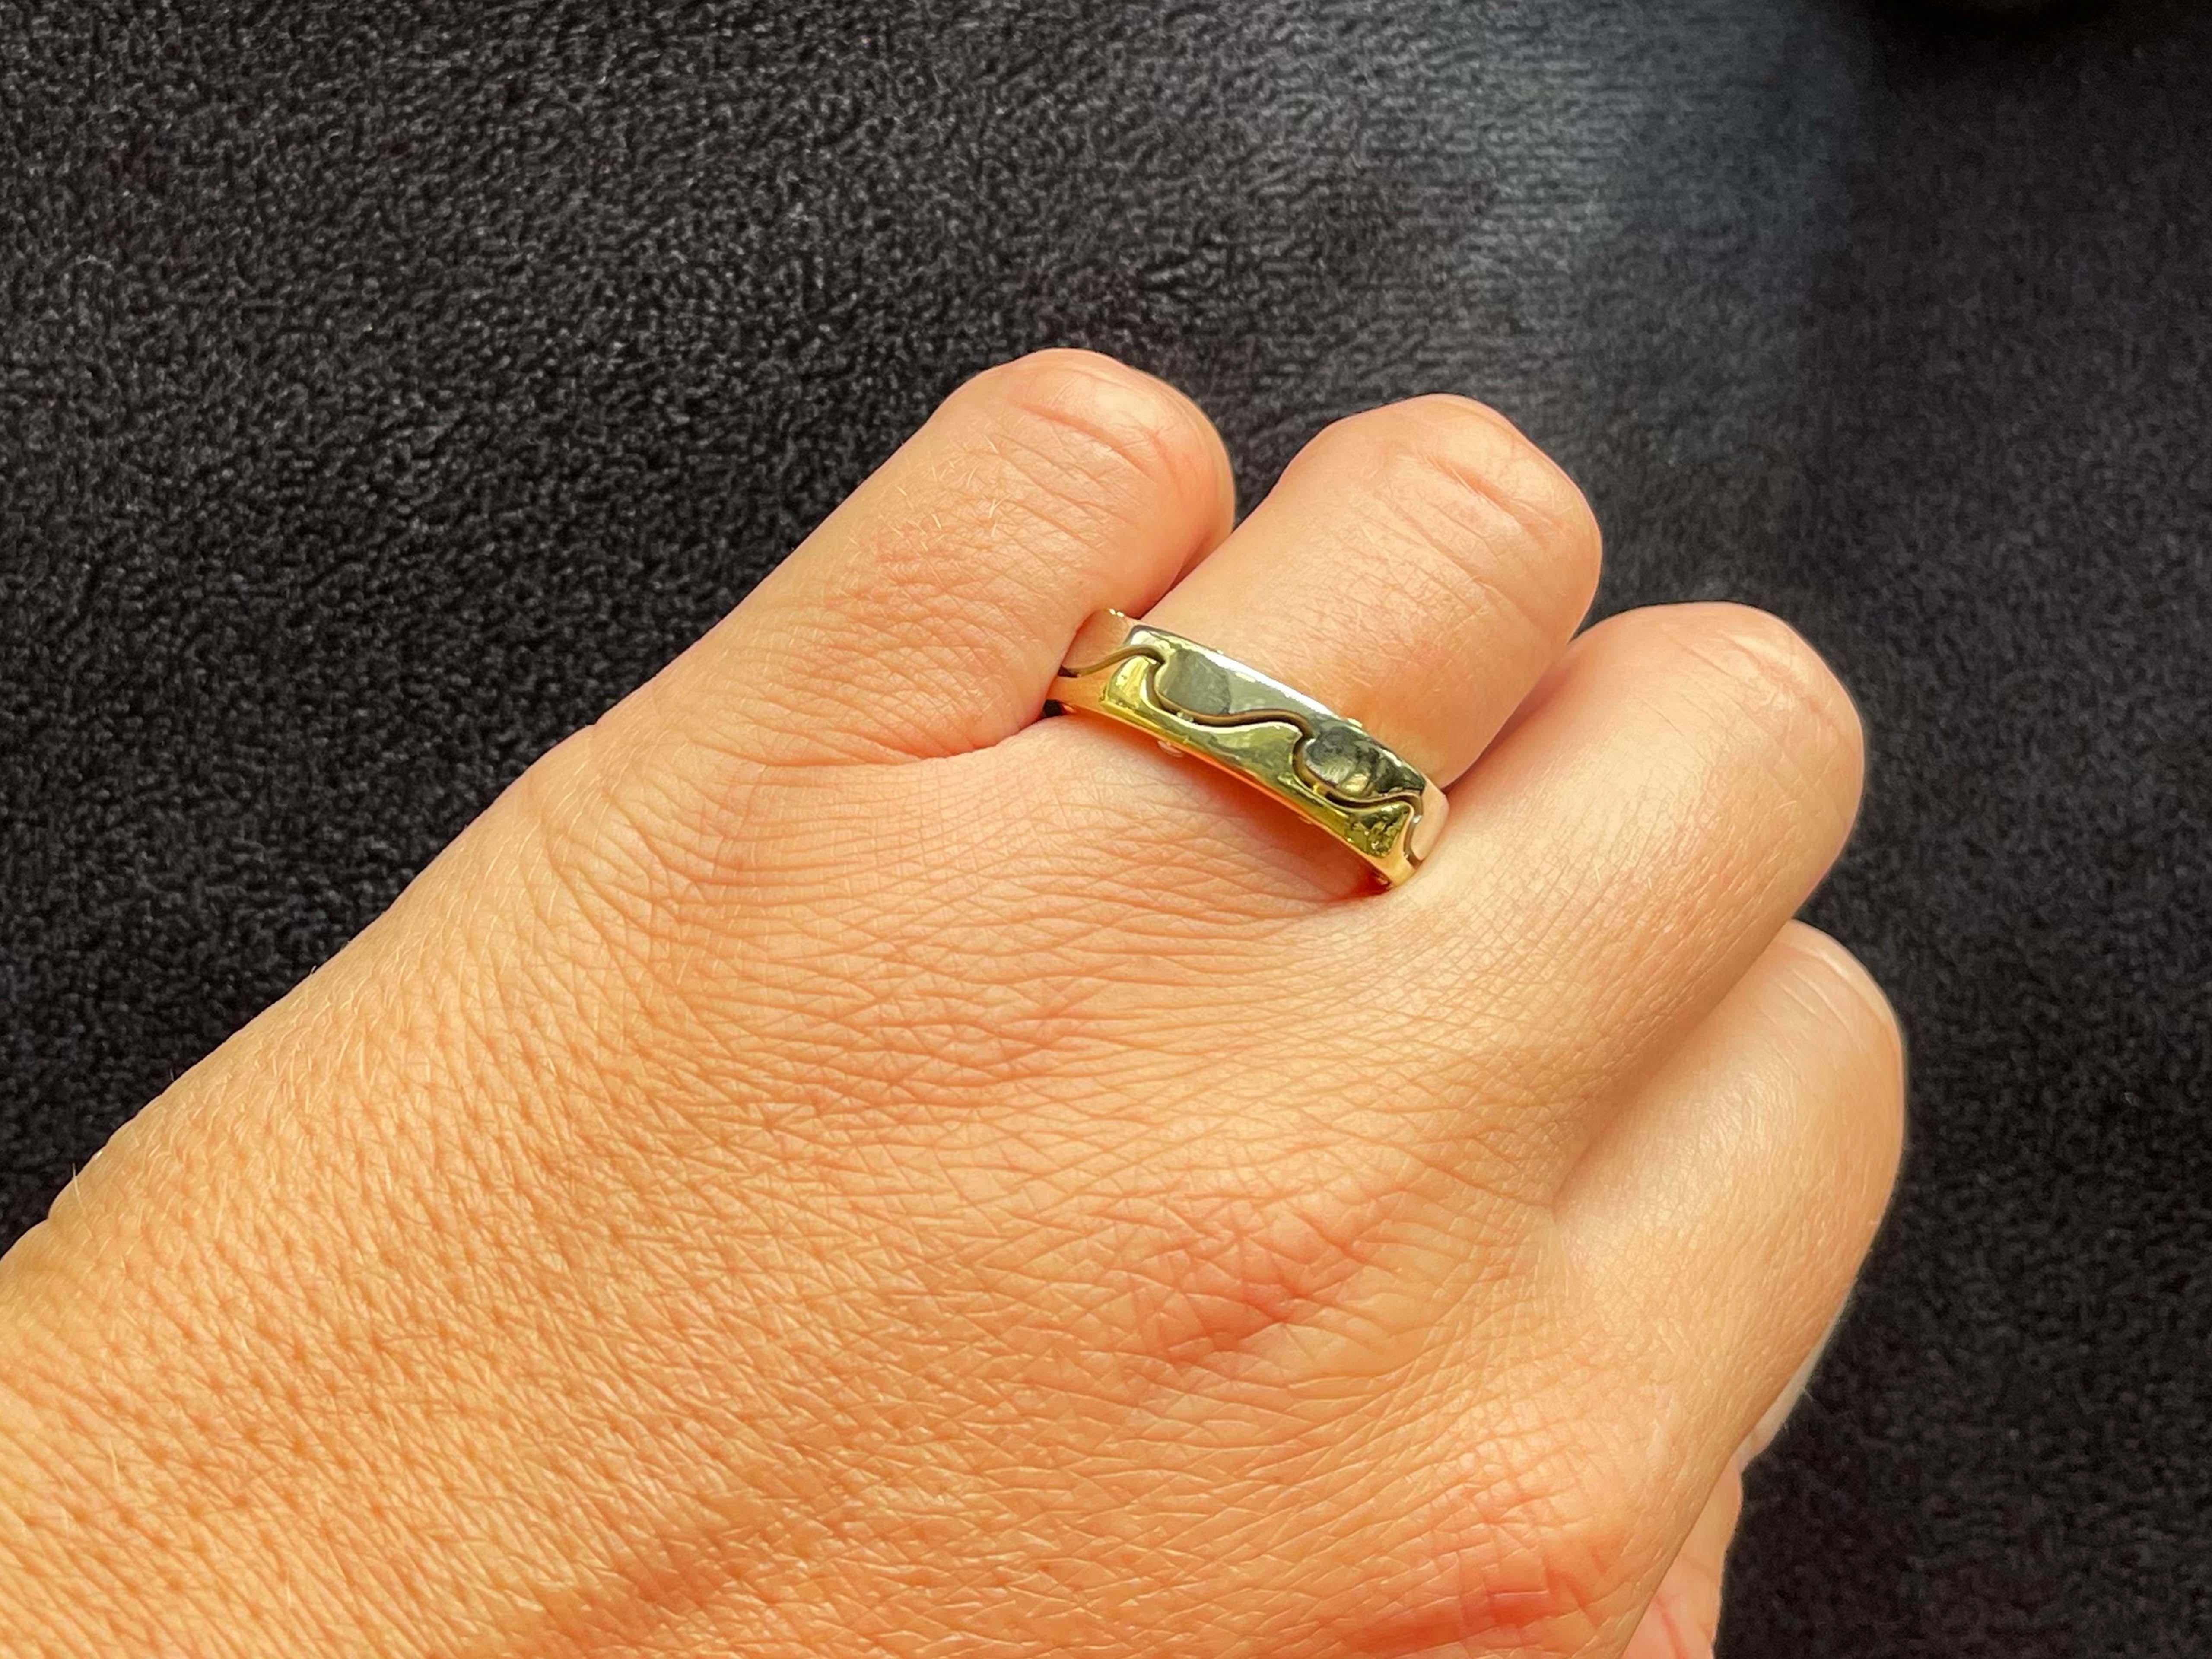 Item Specifications:

Metal: 18K Yellow and White Gold

Style: Statement Ring
​
​Ring Height: 6.47 mm

Ring Size: 9 (resizing available for a fee)

Total Weight: 12 Grams

Condition: Preowned, excellent

Stamped: 